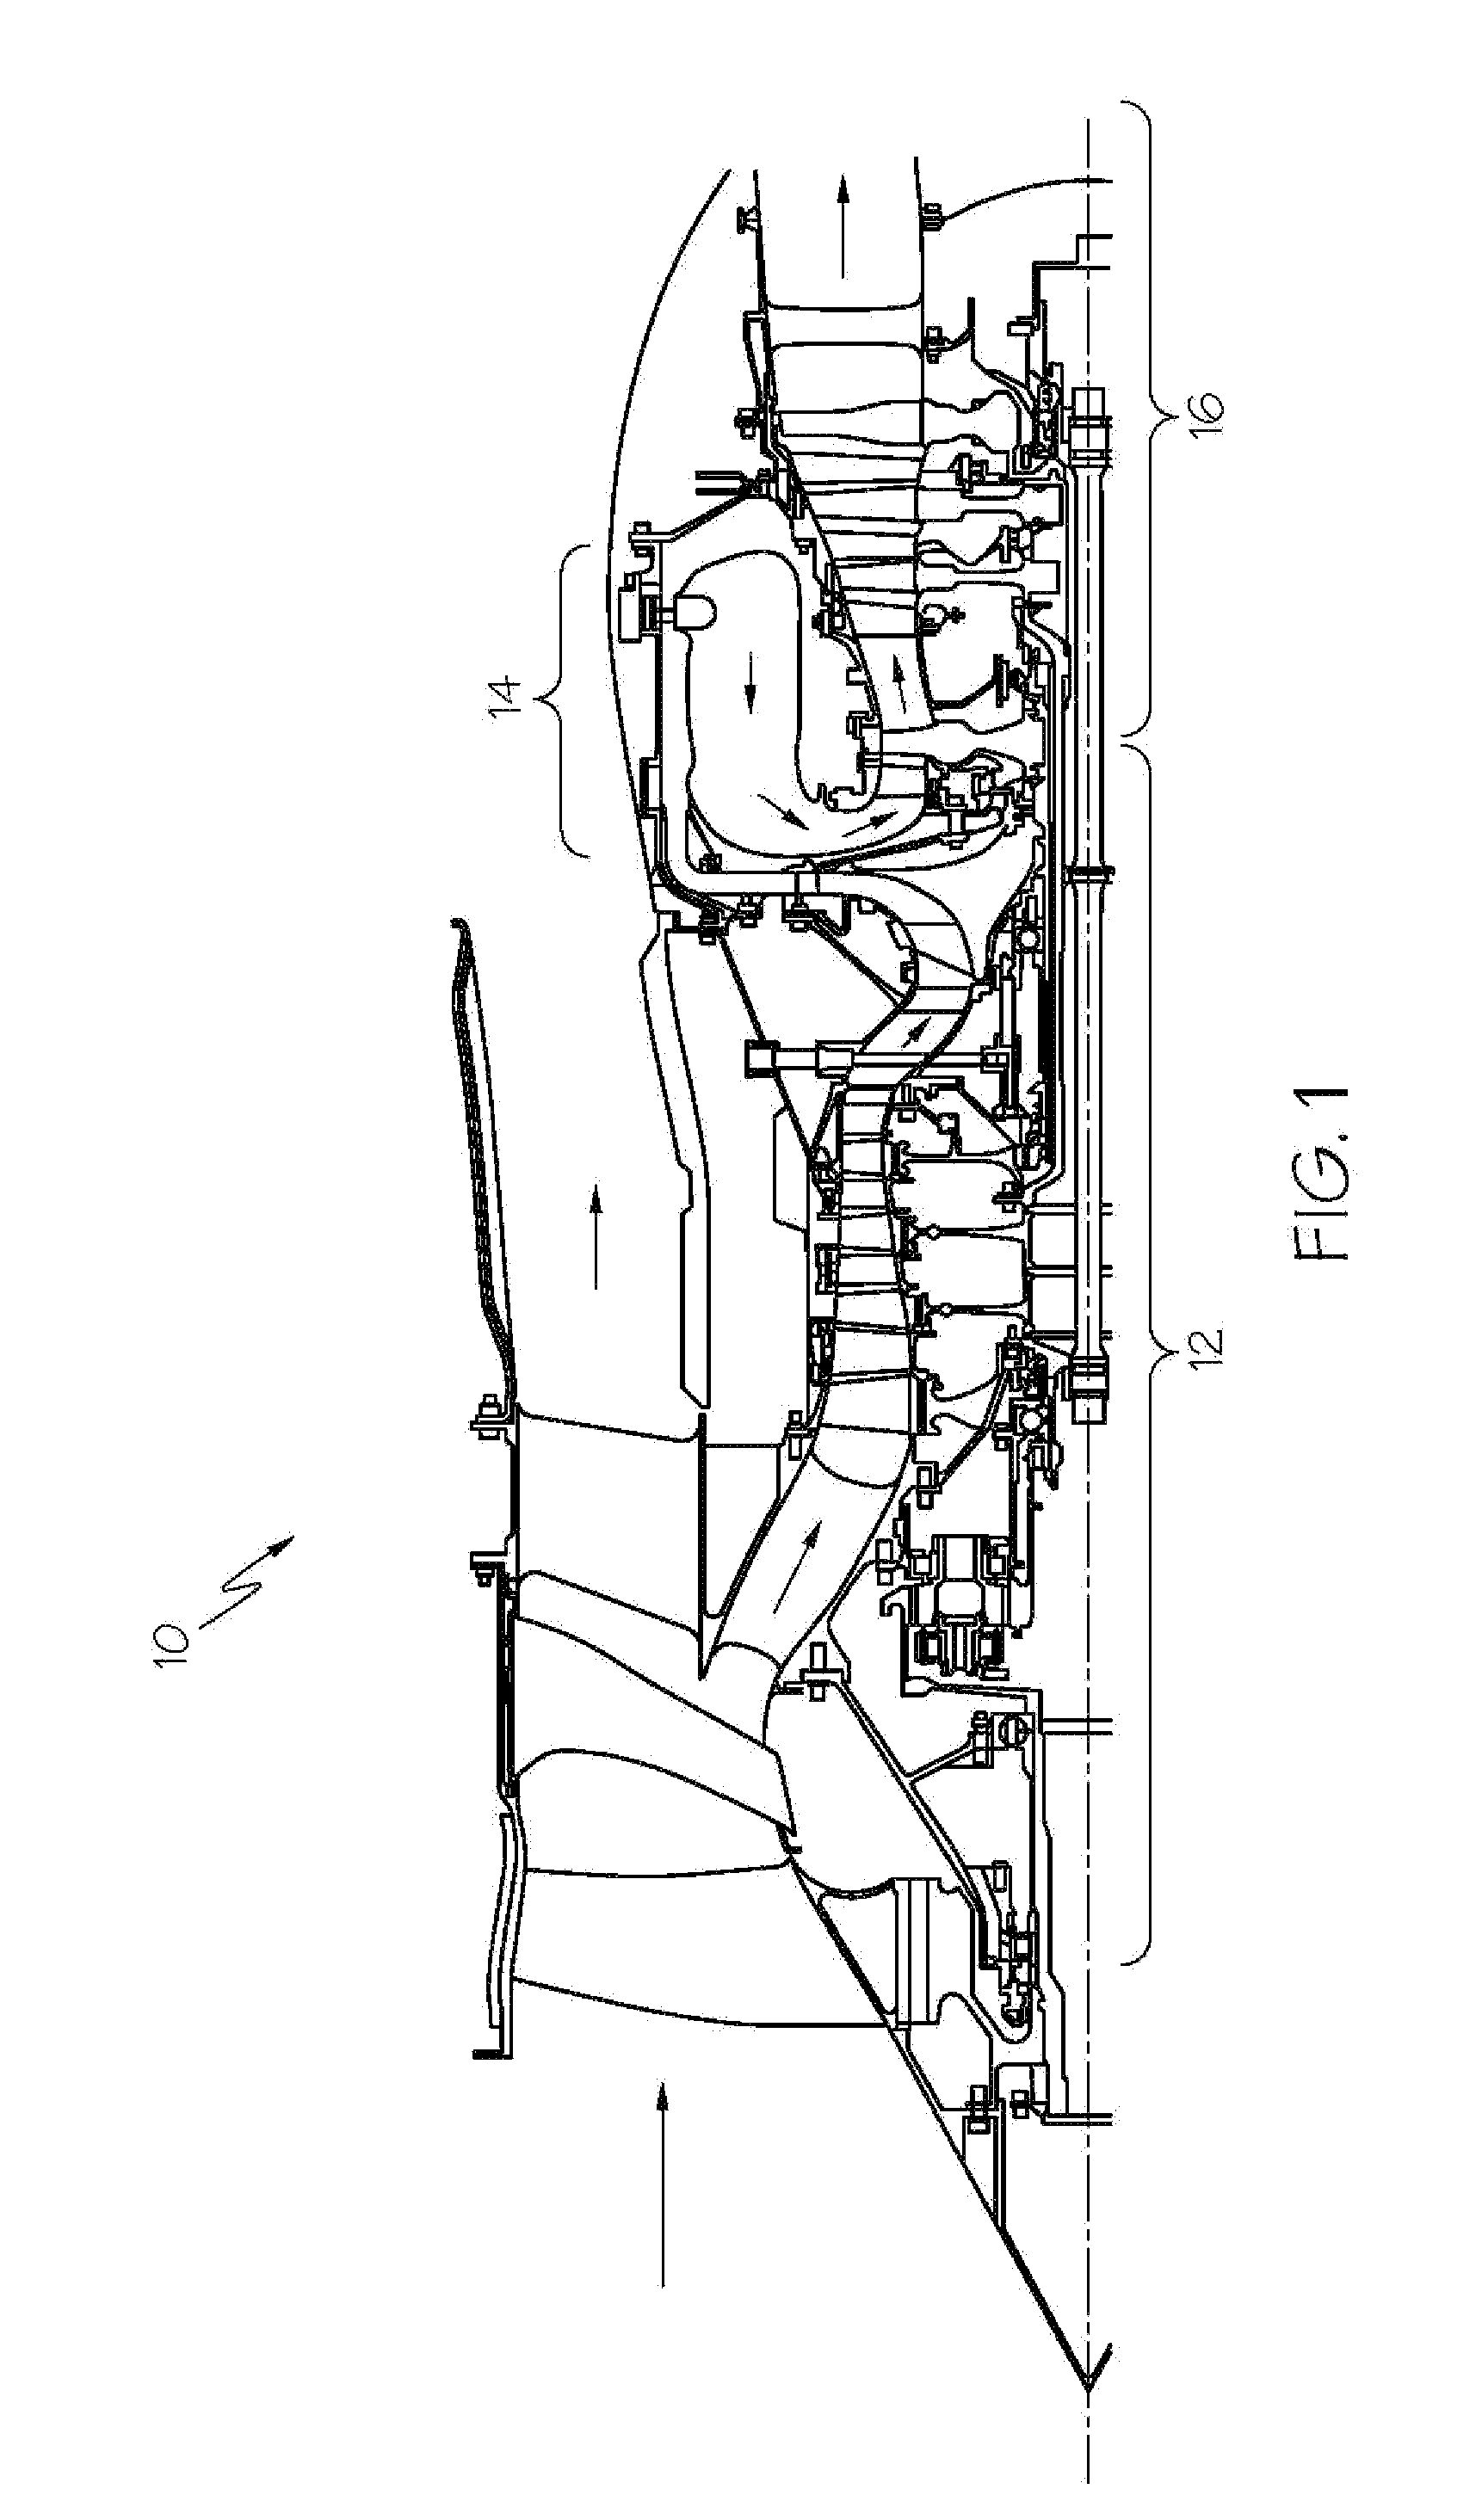 Direct transfer axial tangential onboard injector system (TOBI) with self-supporting seal plate